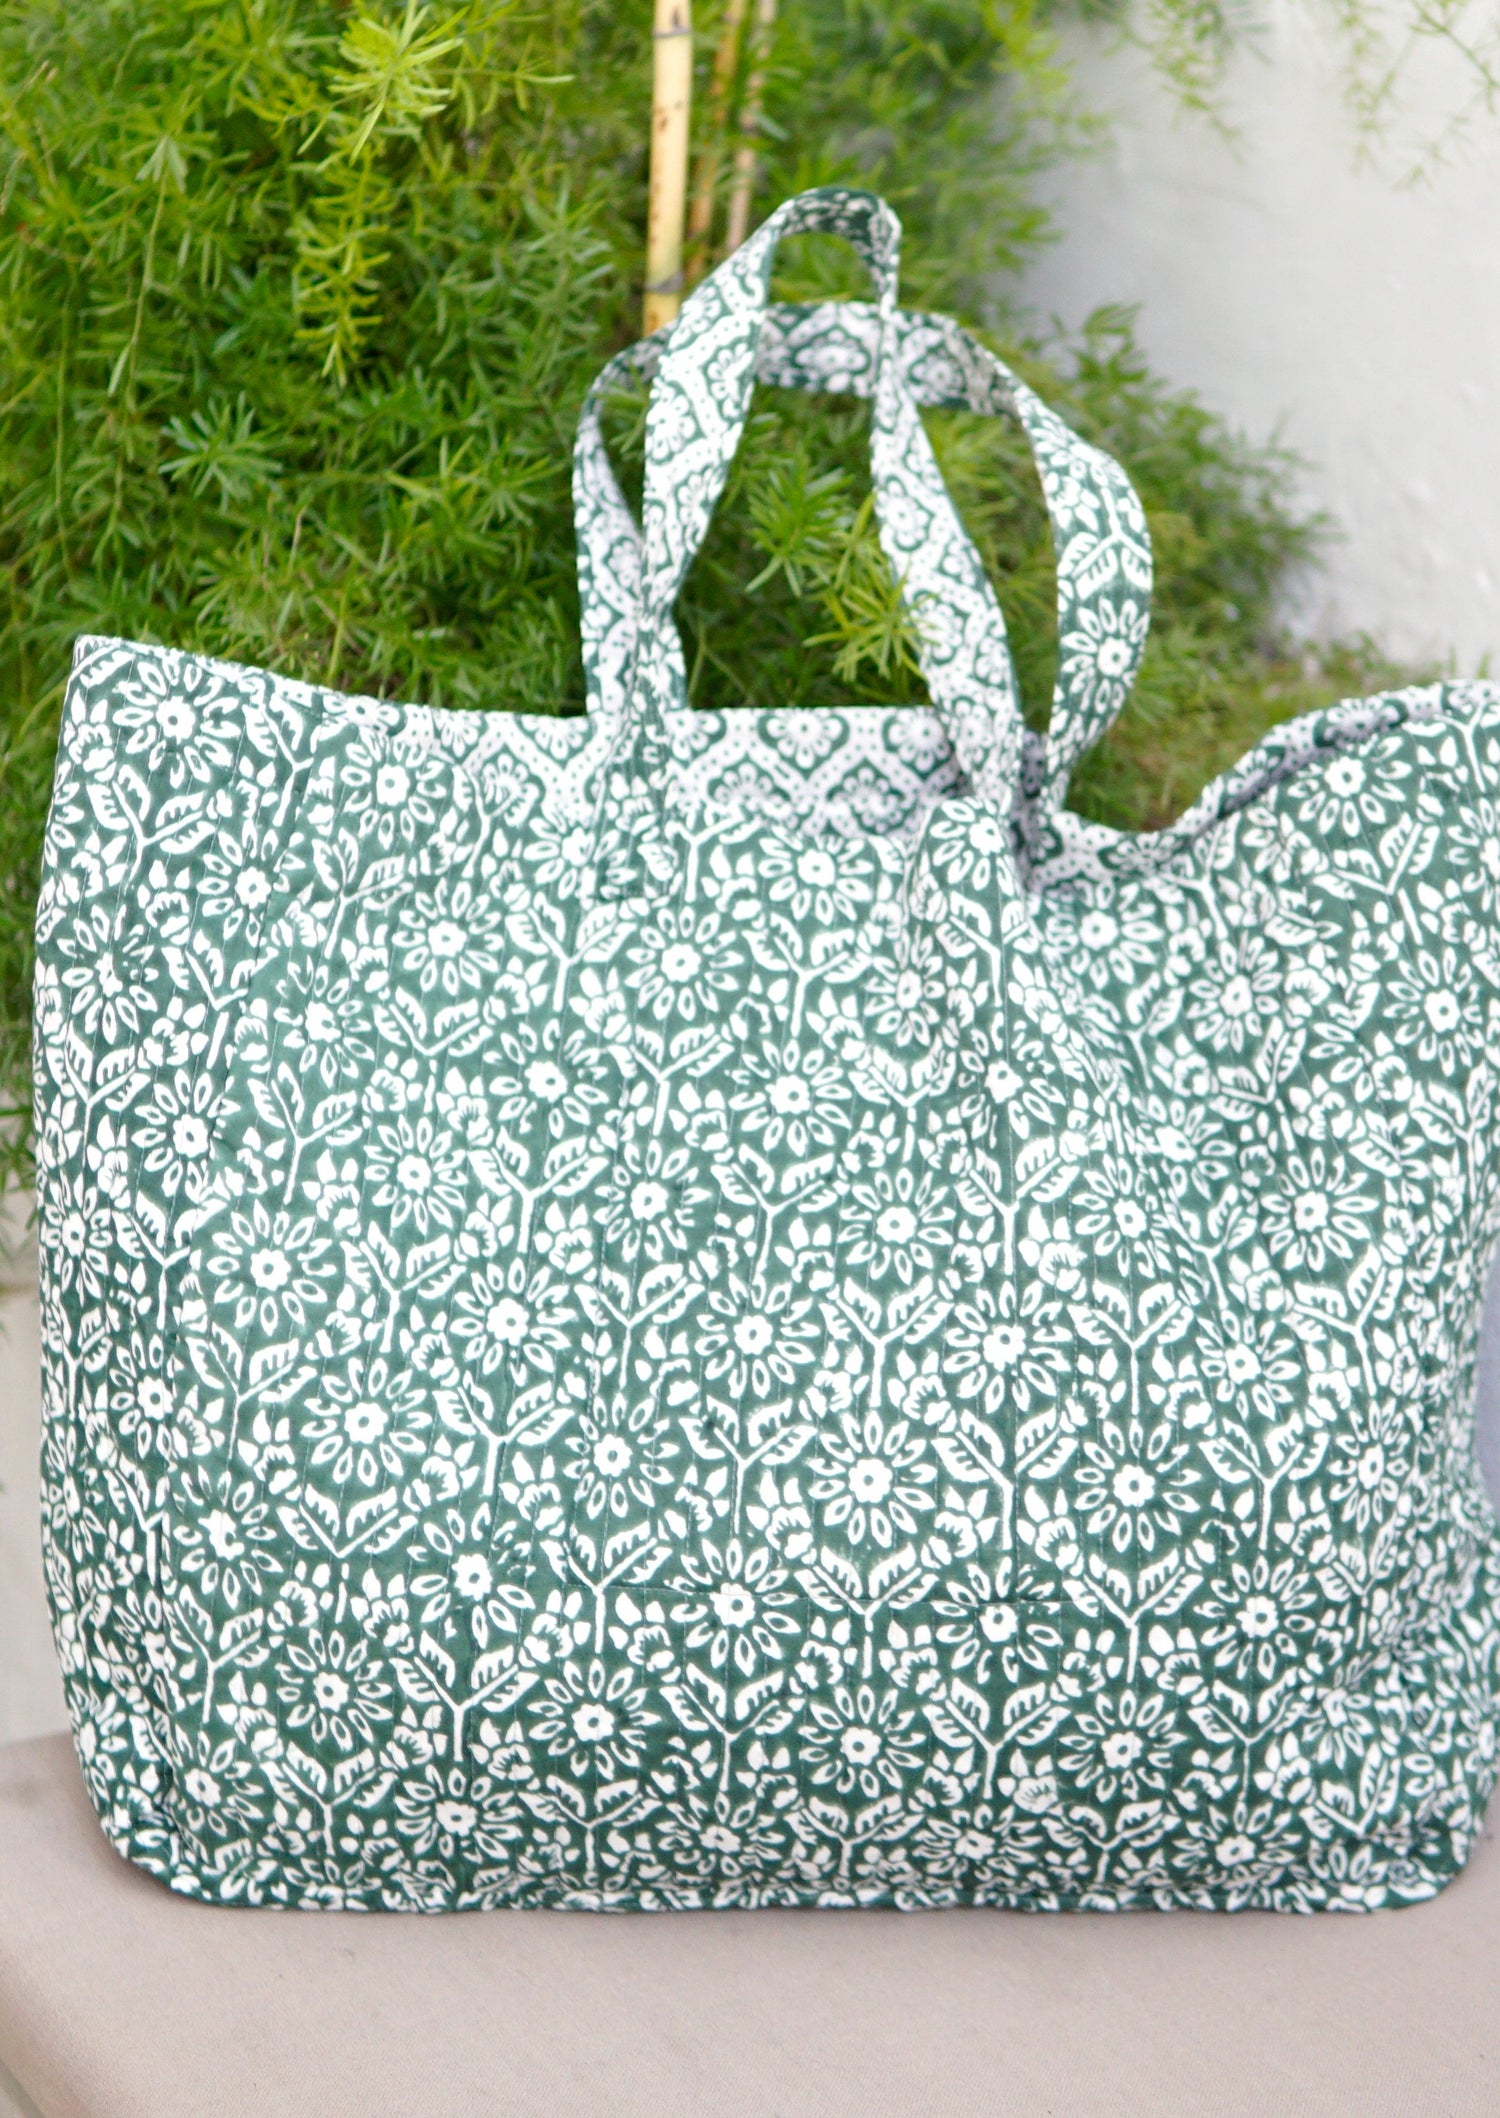 Beach Bag, XL green and white block print, contrast lining with pocket. large beach bag